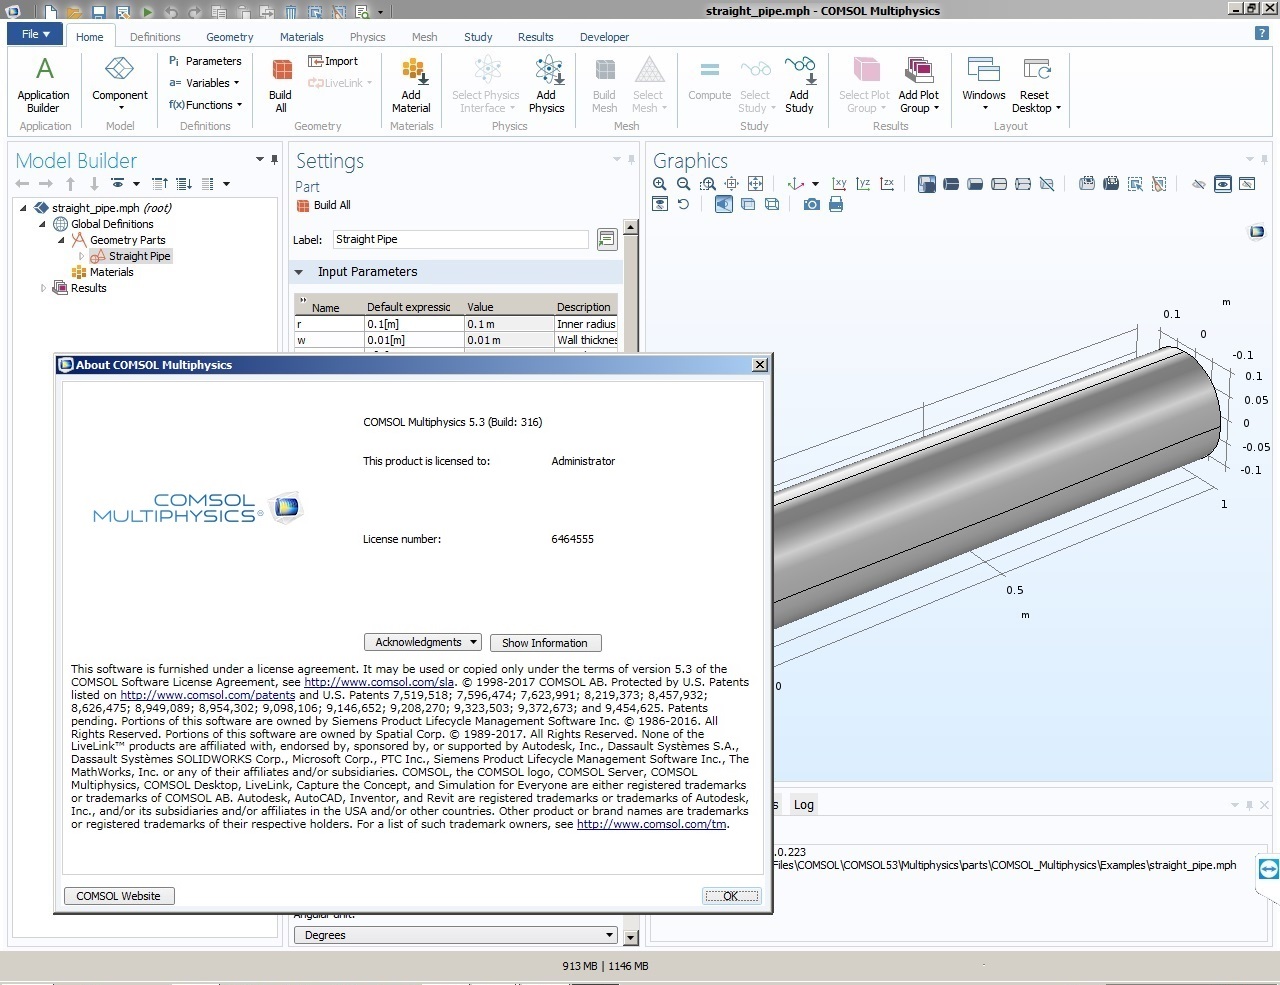 Working with Comsol Multiphysics 5.3.0.316 full license